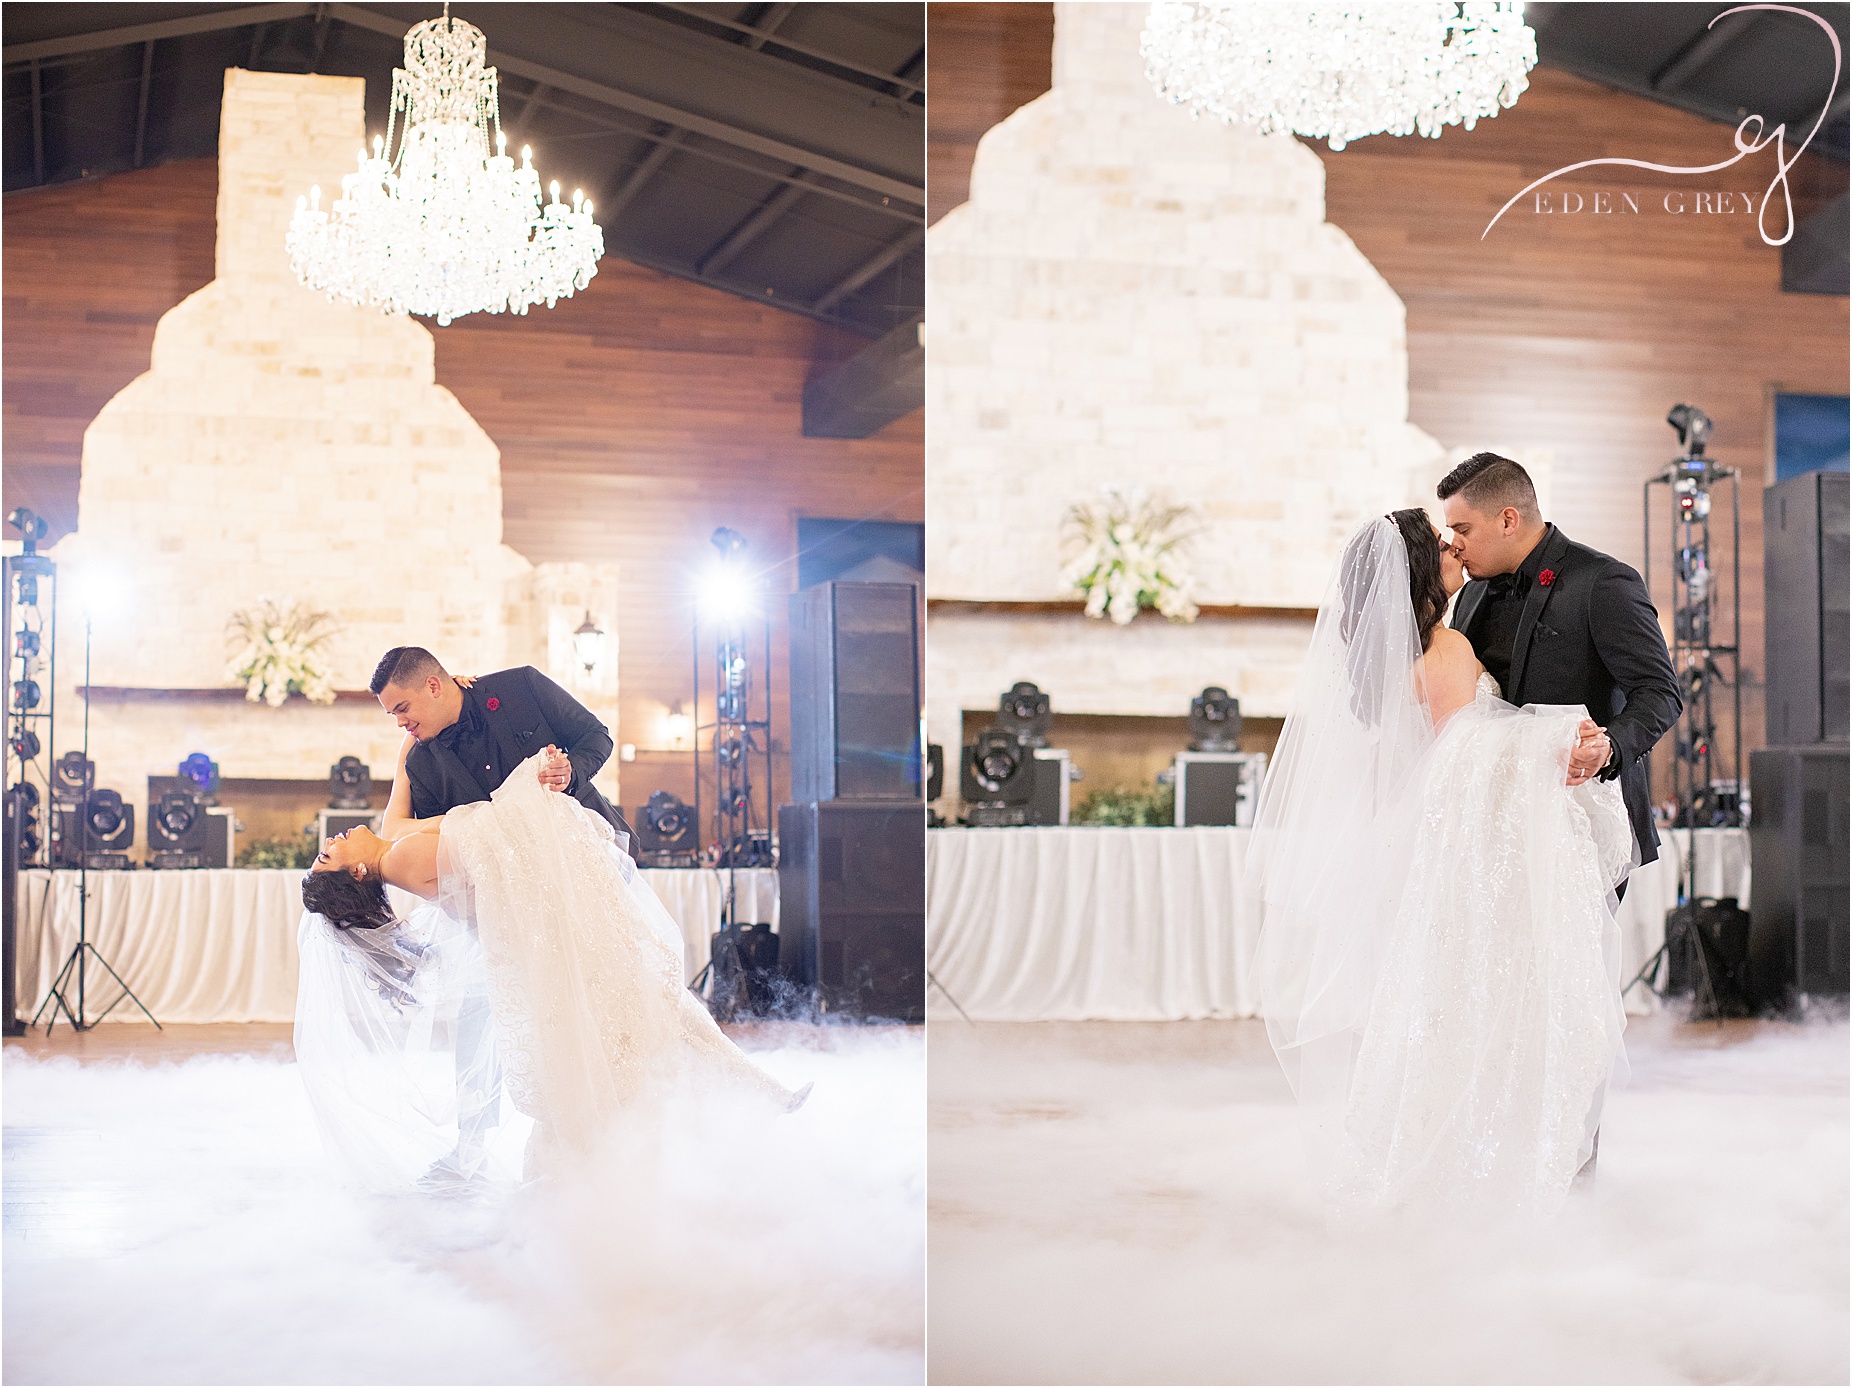 I'm a big fan of fog during a first dance